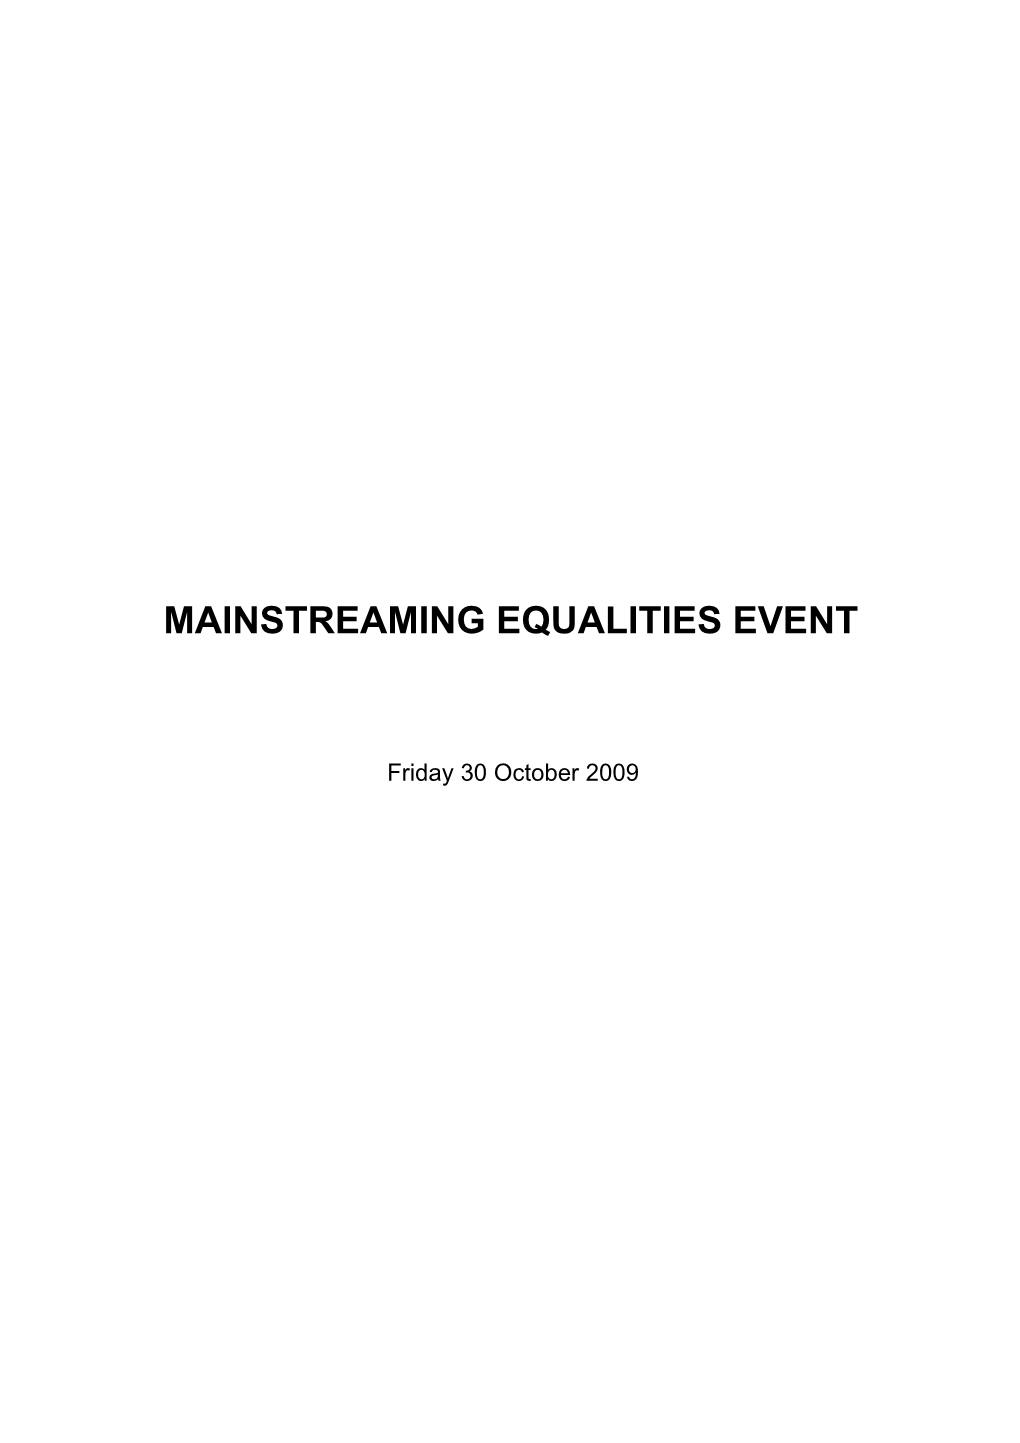 Mainstreaming Equalities Event